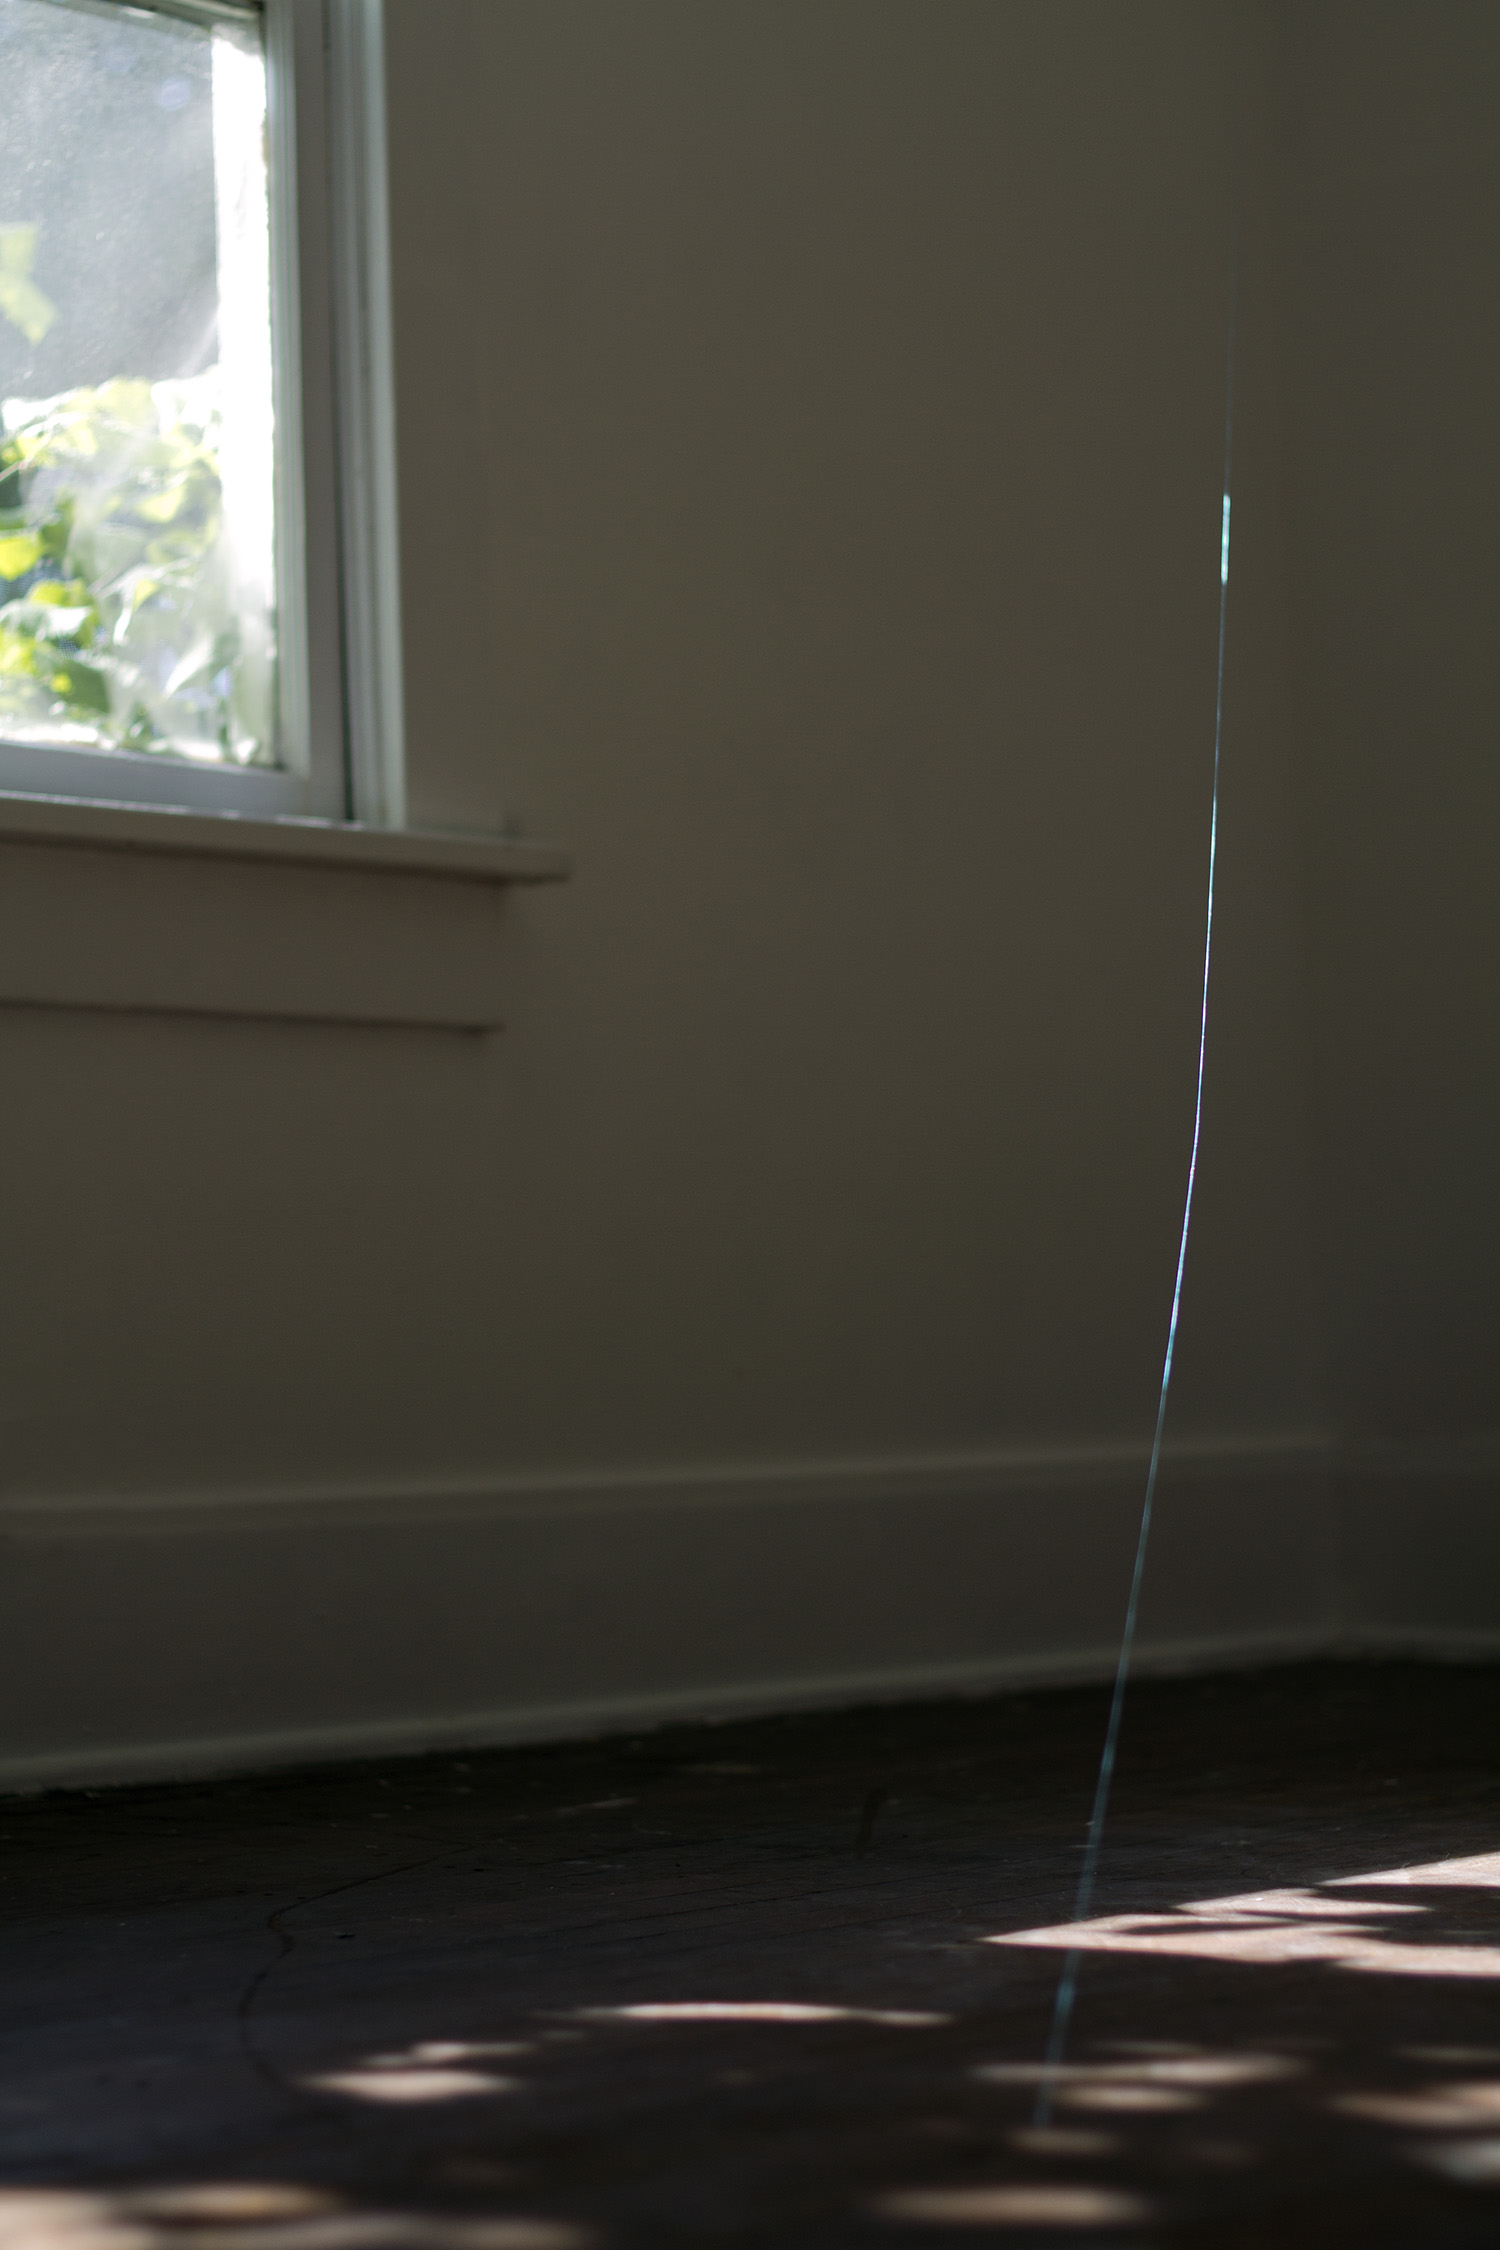    this dust won't re-form into rain  , 2012 string, natural light, wind 88 x 104.5 x 58.5 in.  Wilkinson House, University of Oregon, Eugene OR 